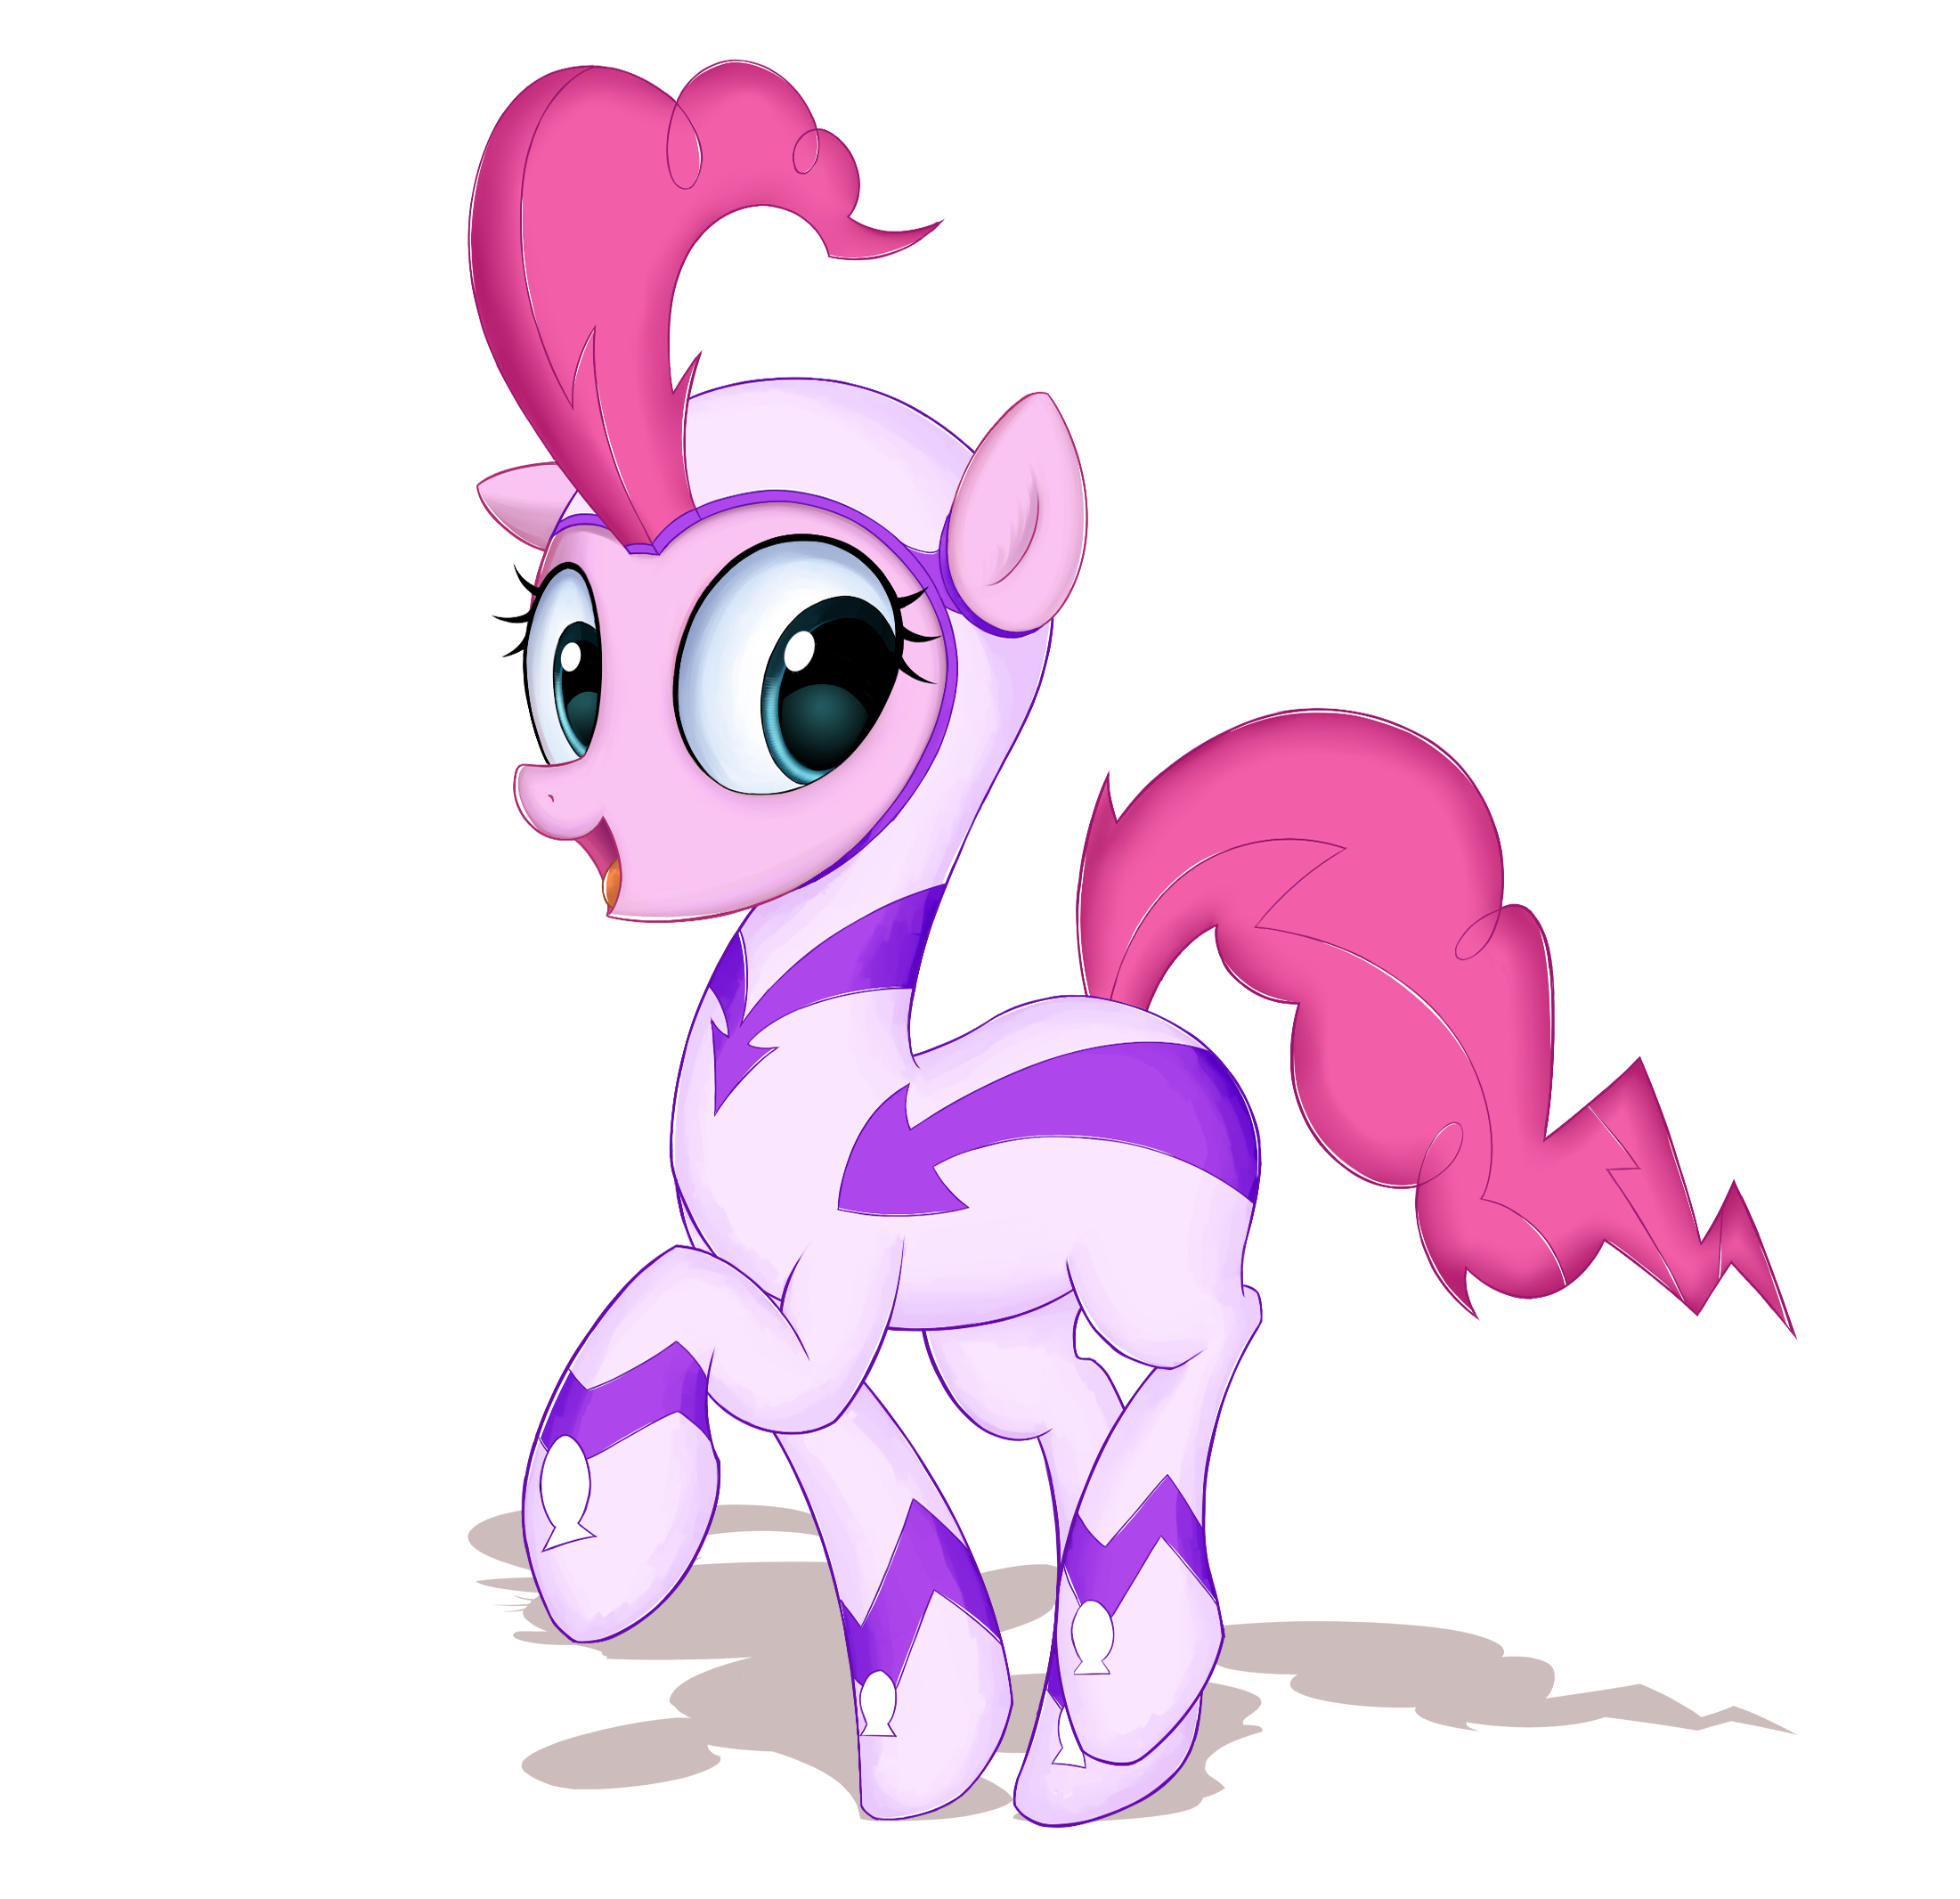 filly_second_by_kas92-d6z5fpw.png